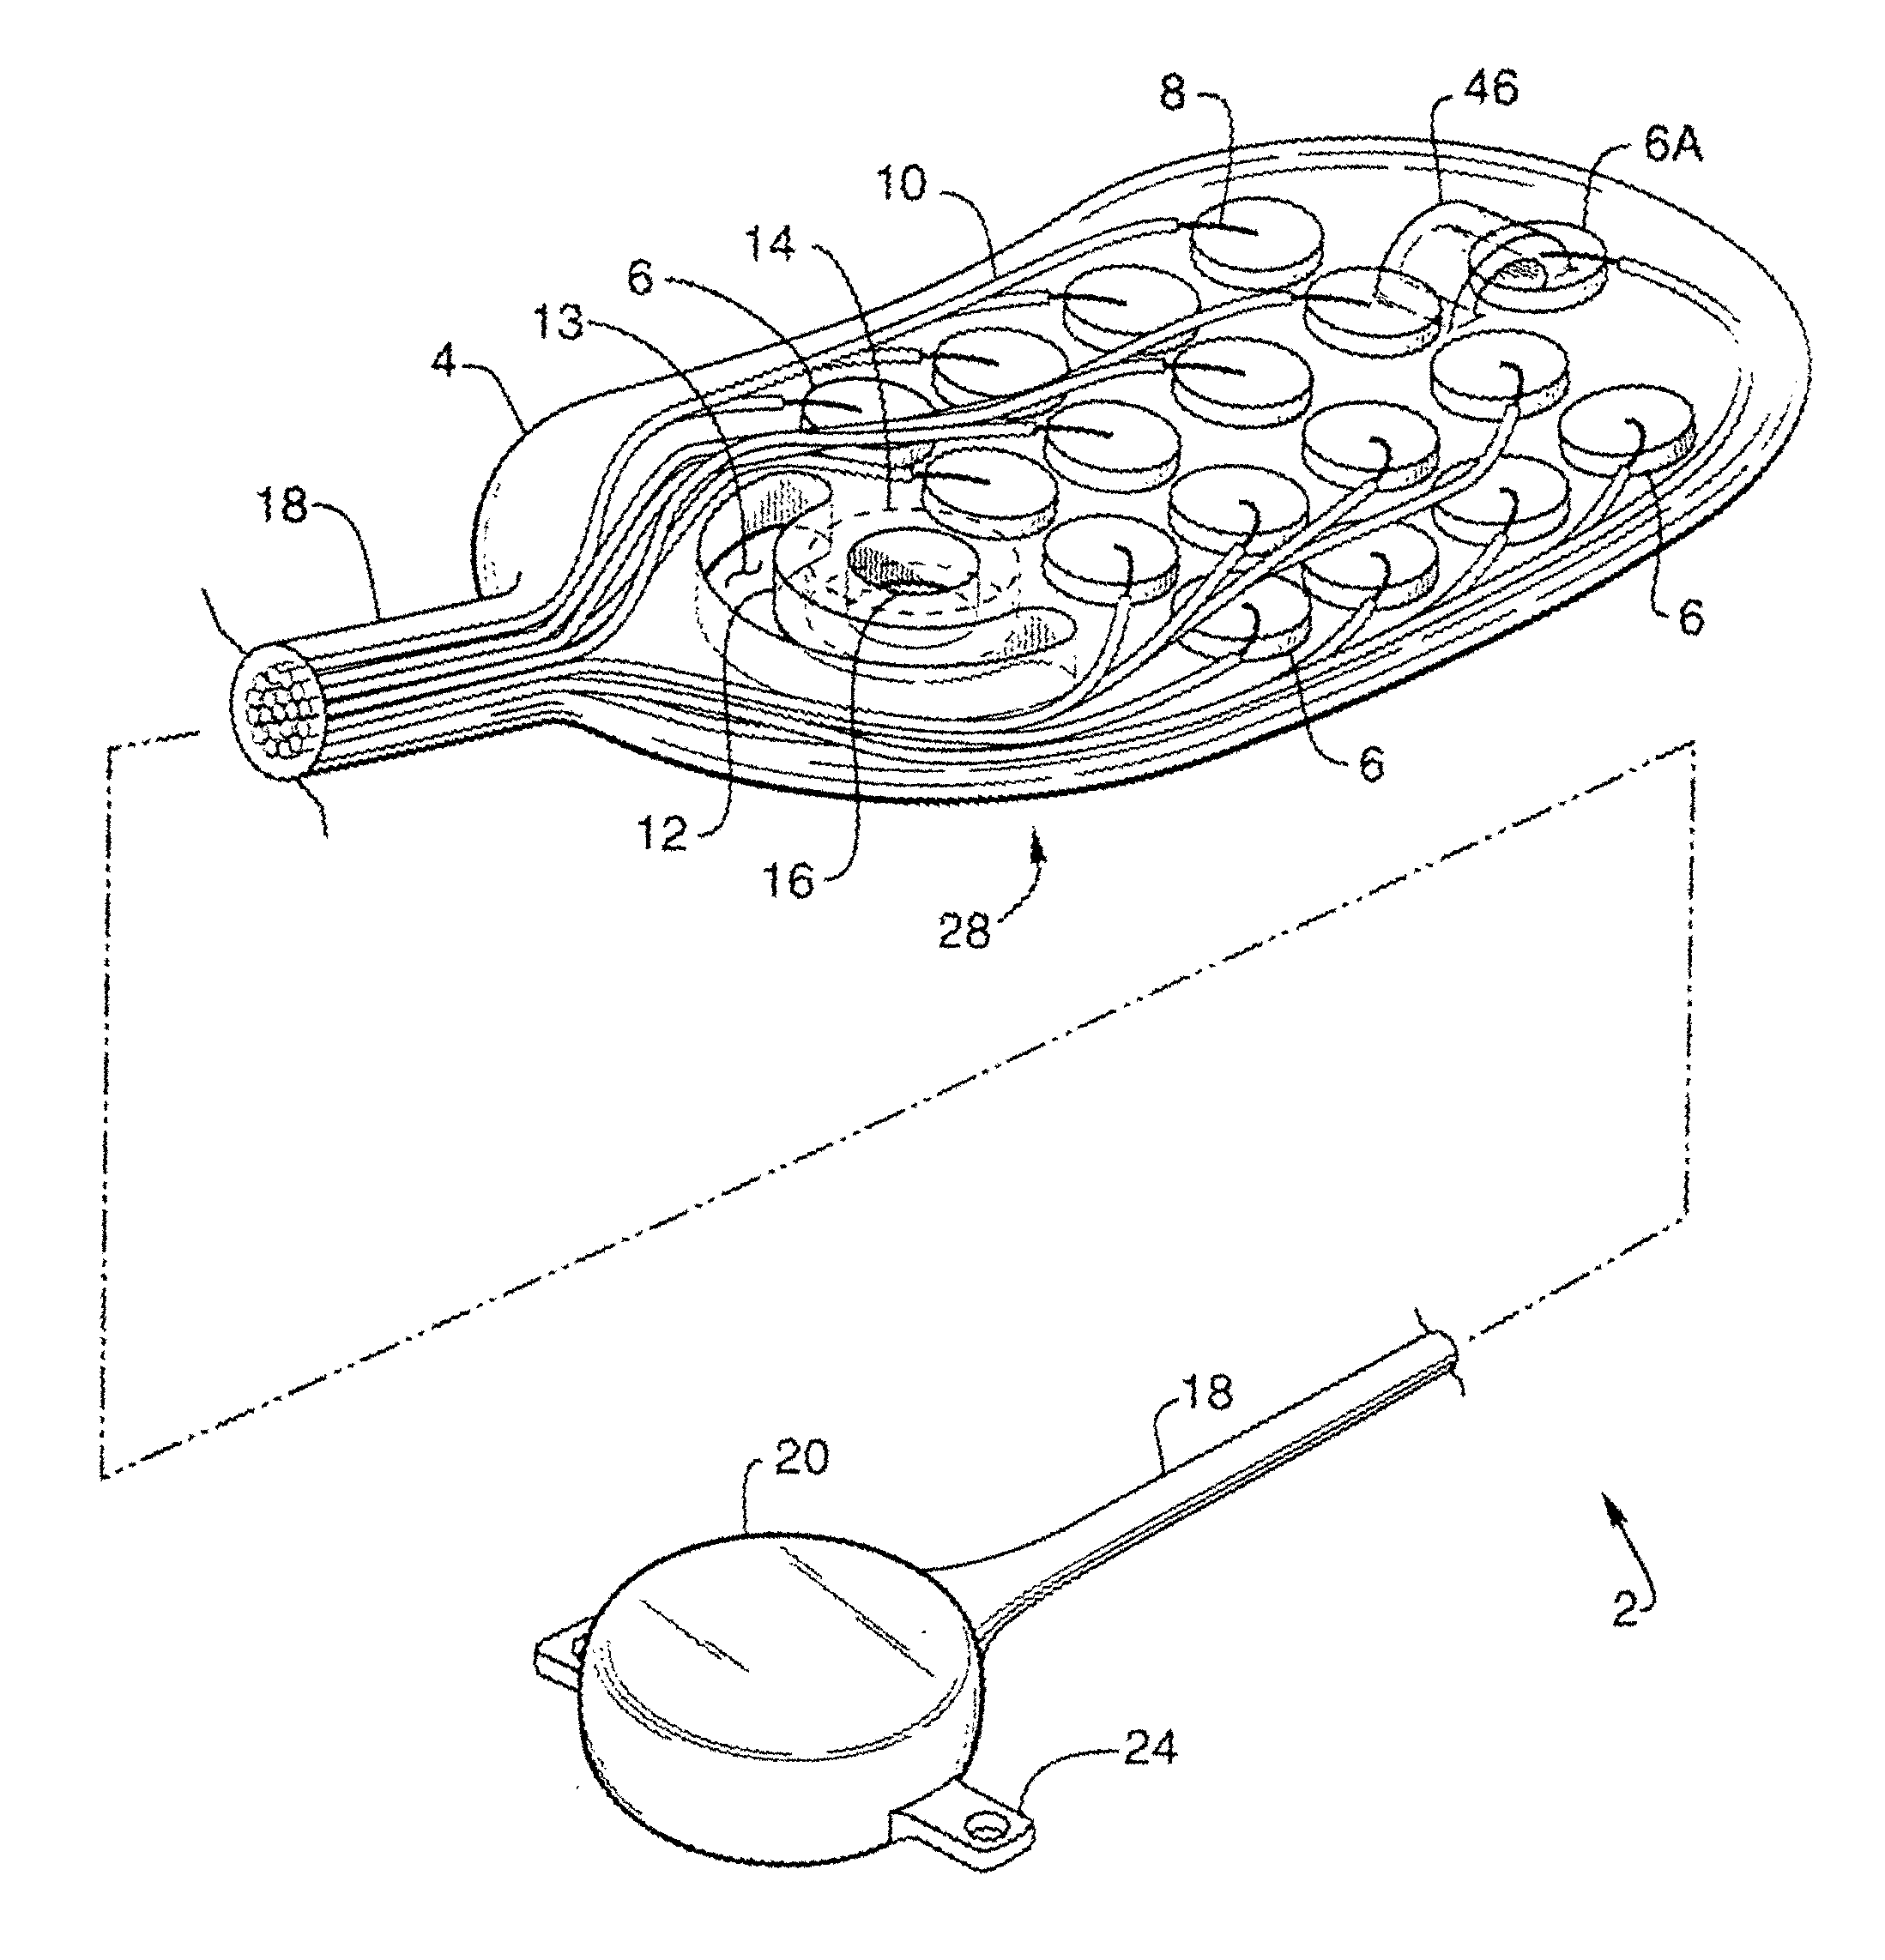 Surgical tool for electrode implantation